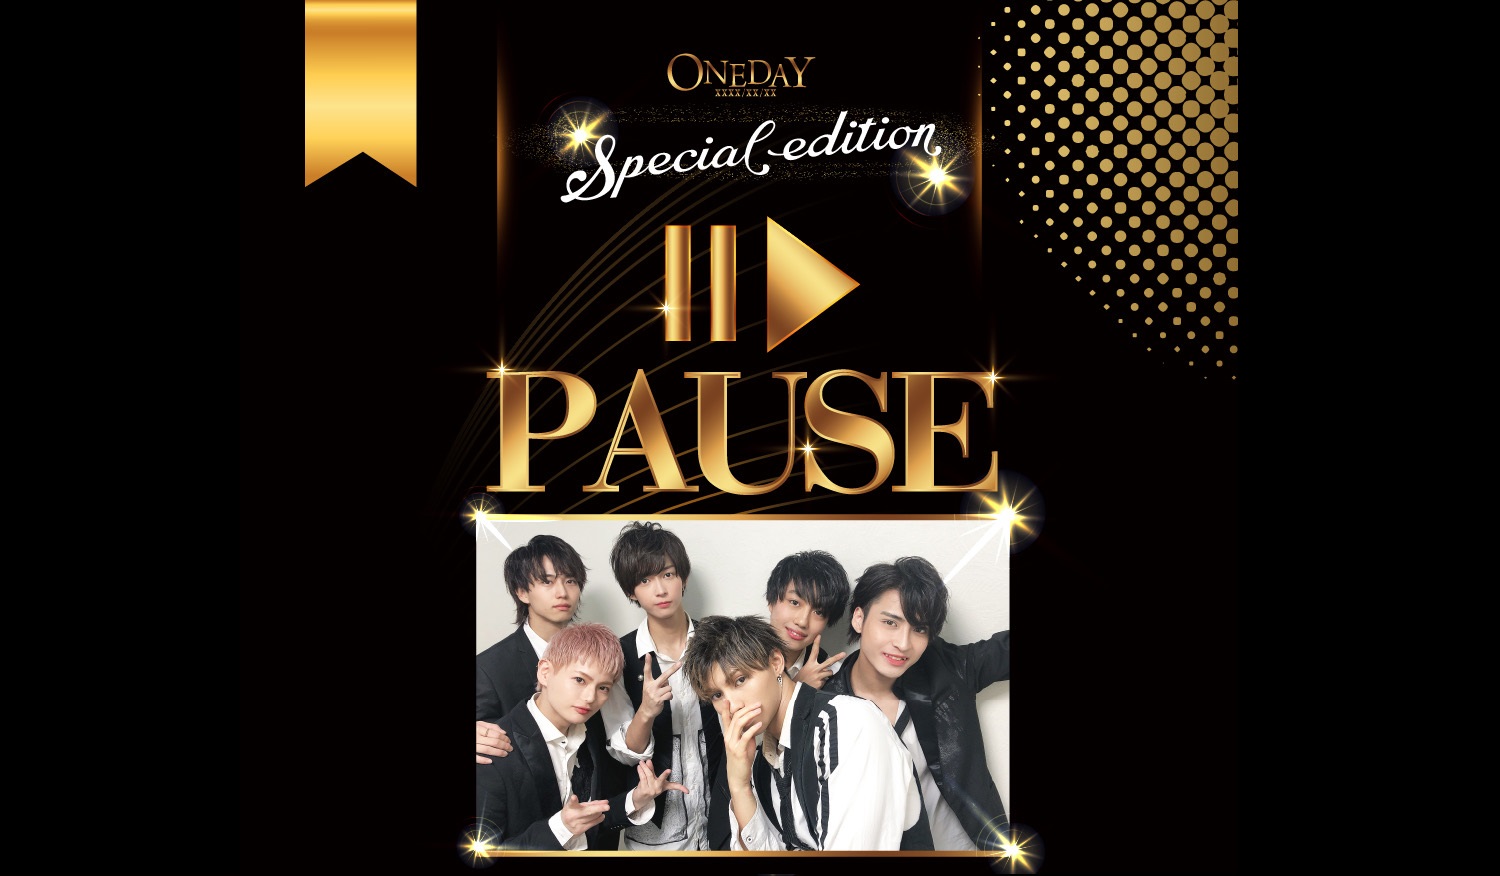 ONE DAY Special Edition “PAUSE”